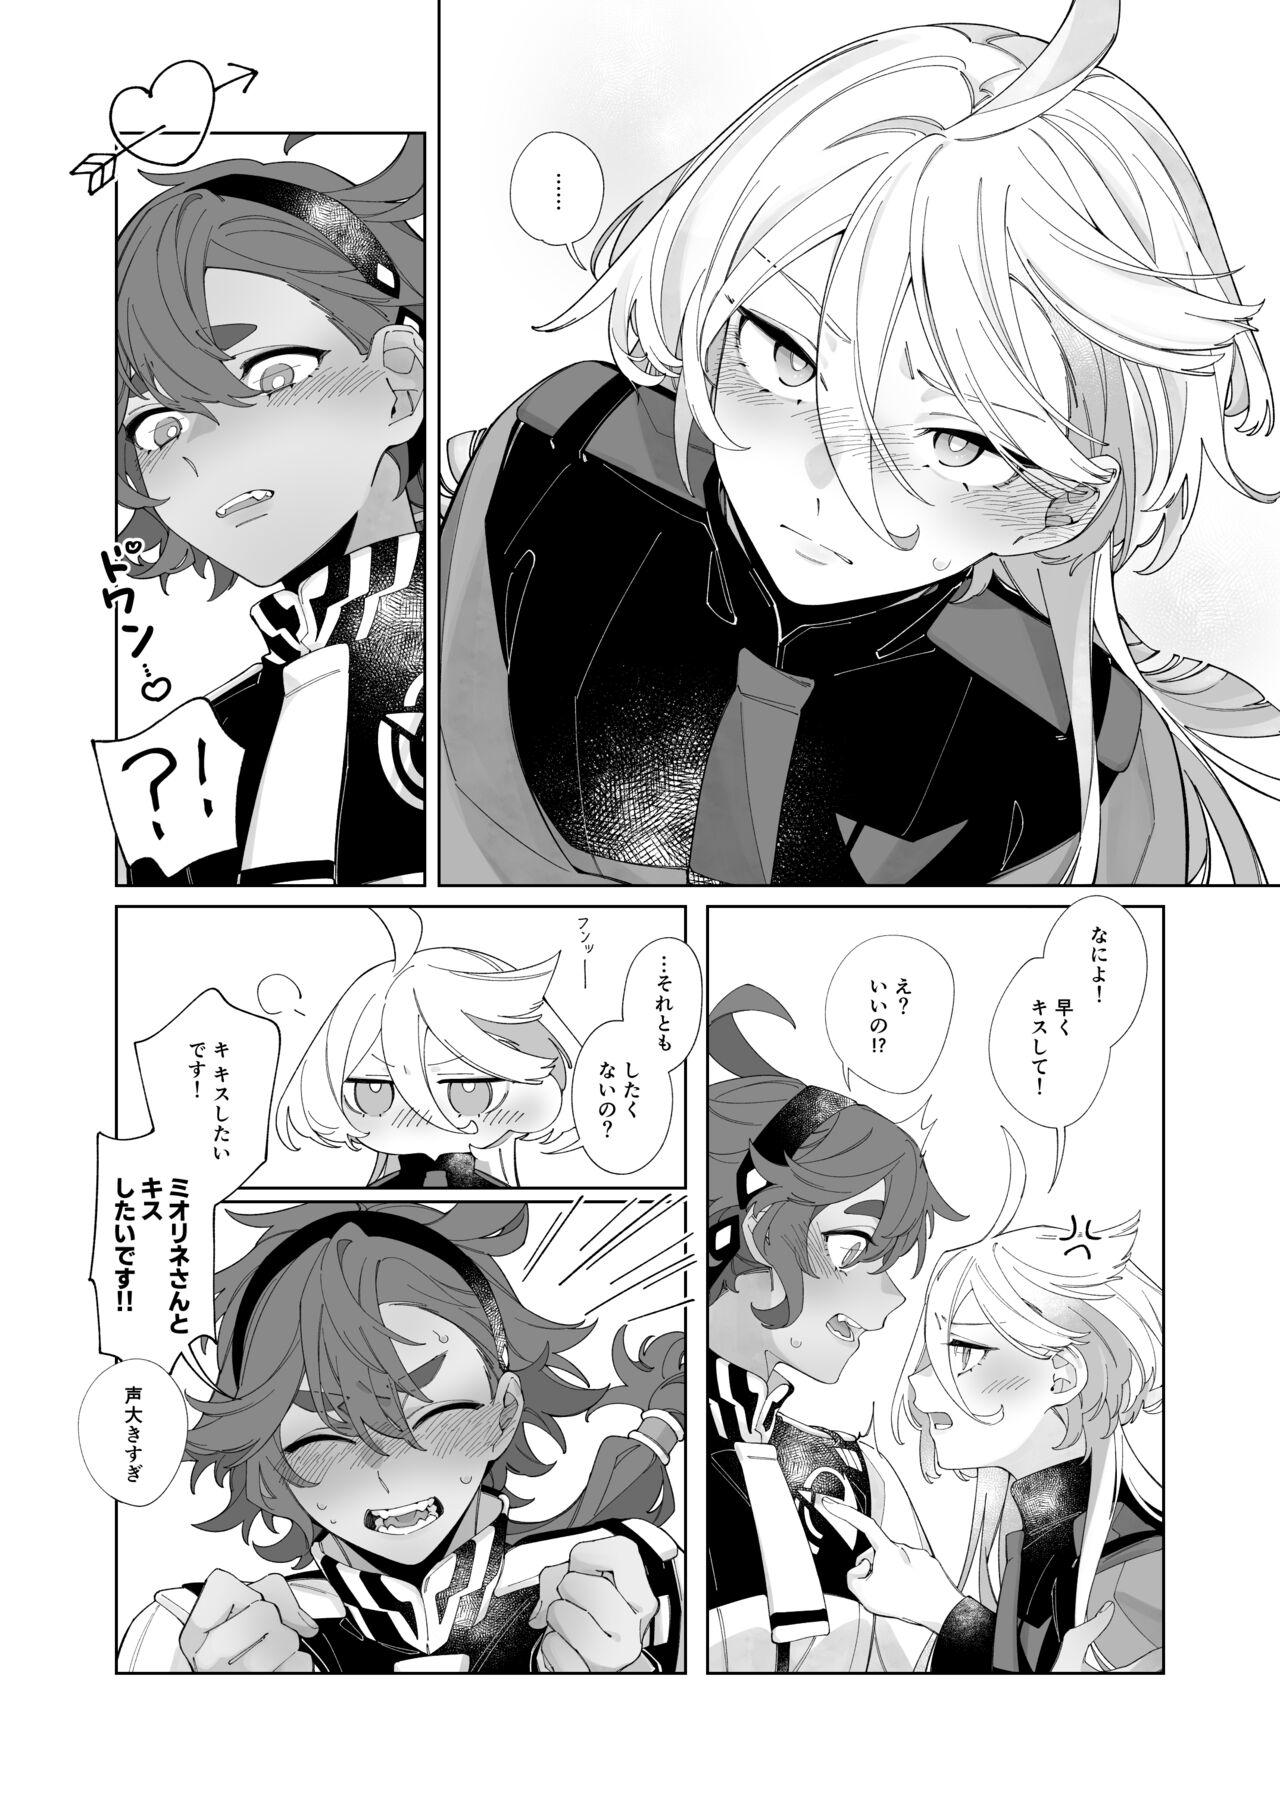 Gay College Kiss no Ato Nani ga Shitai? - After kissing, what else do you want to do? - Mobile suit gundam the witch from mercury Femdom Pov - Page 6